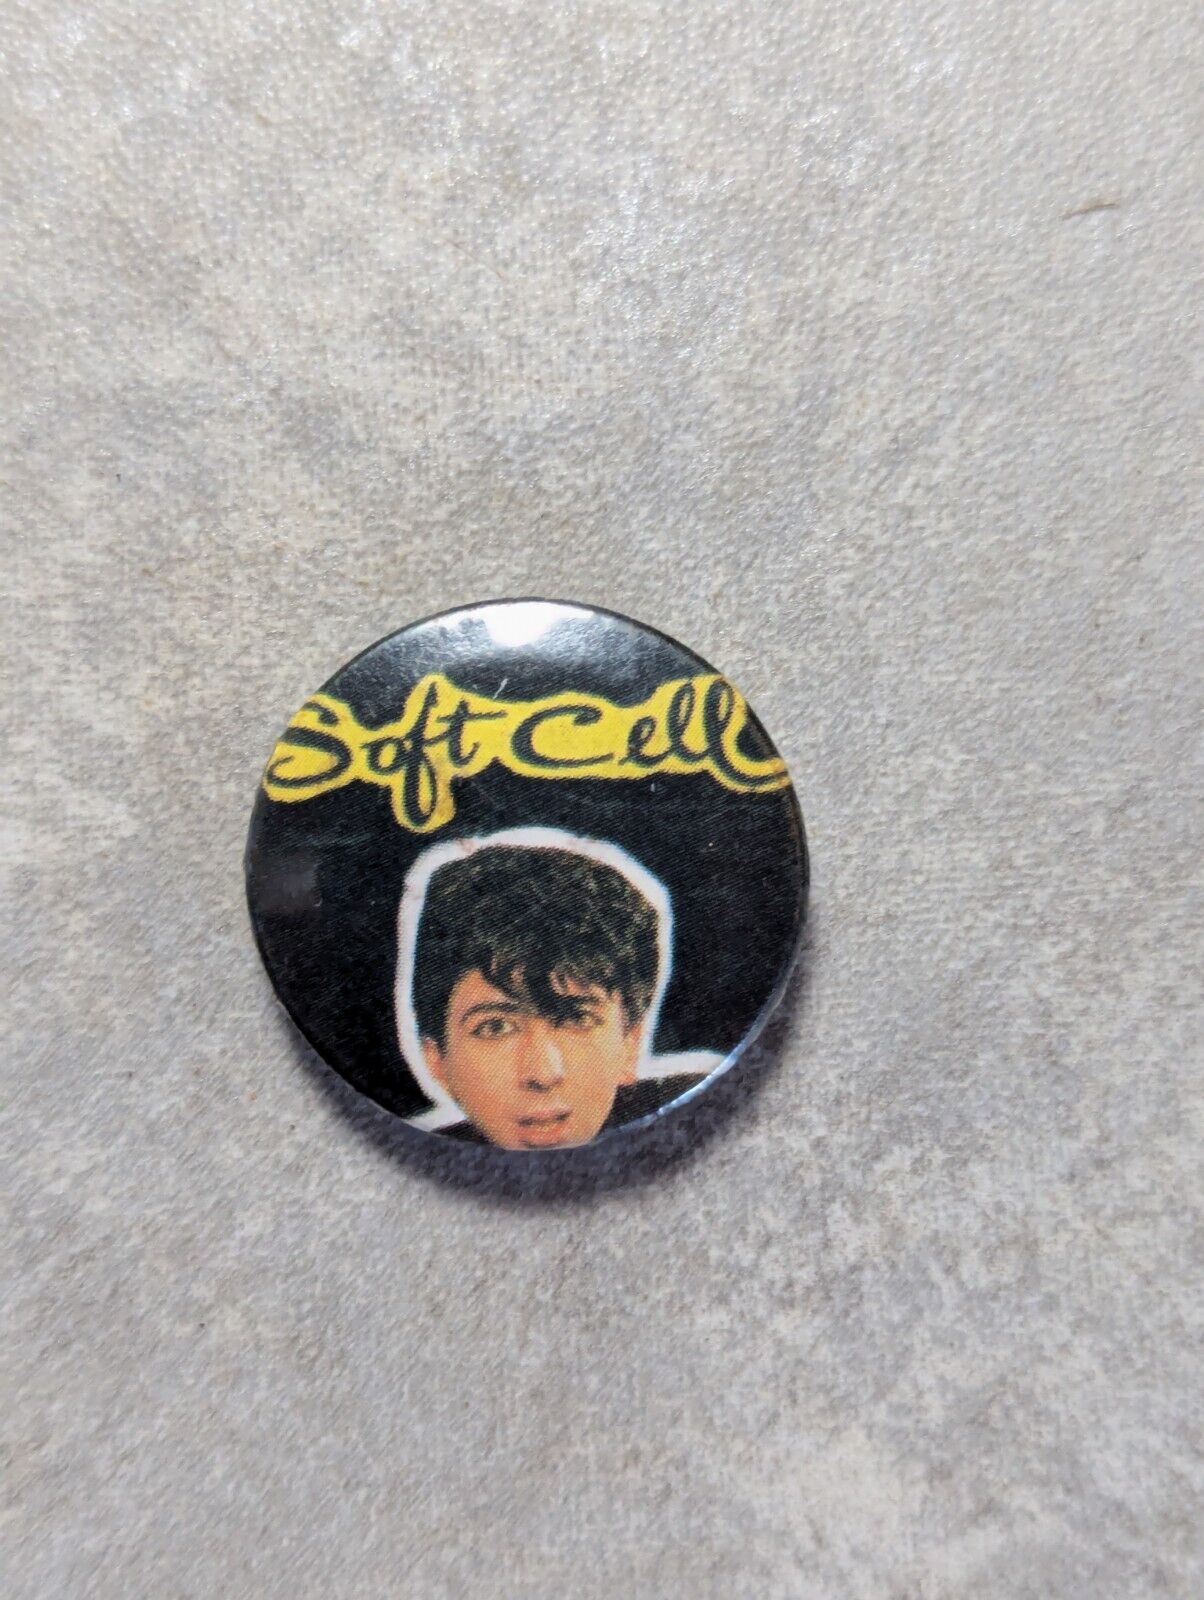 Vintage 80s Soft Cell Pin BADGE Purchased Around 1986 Rare